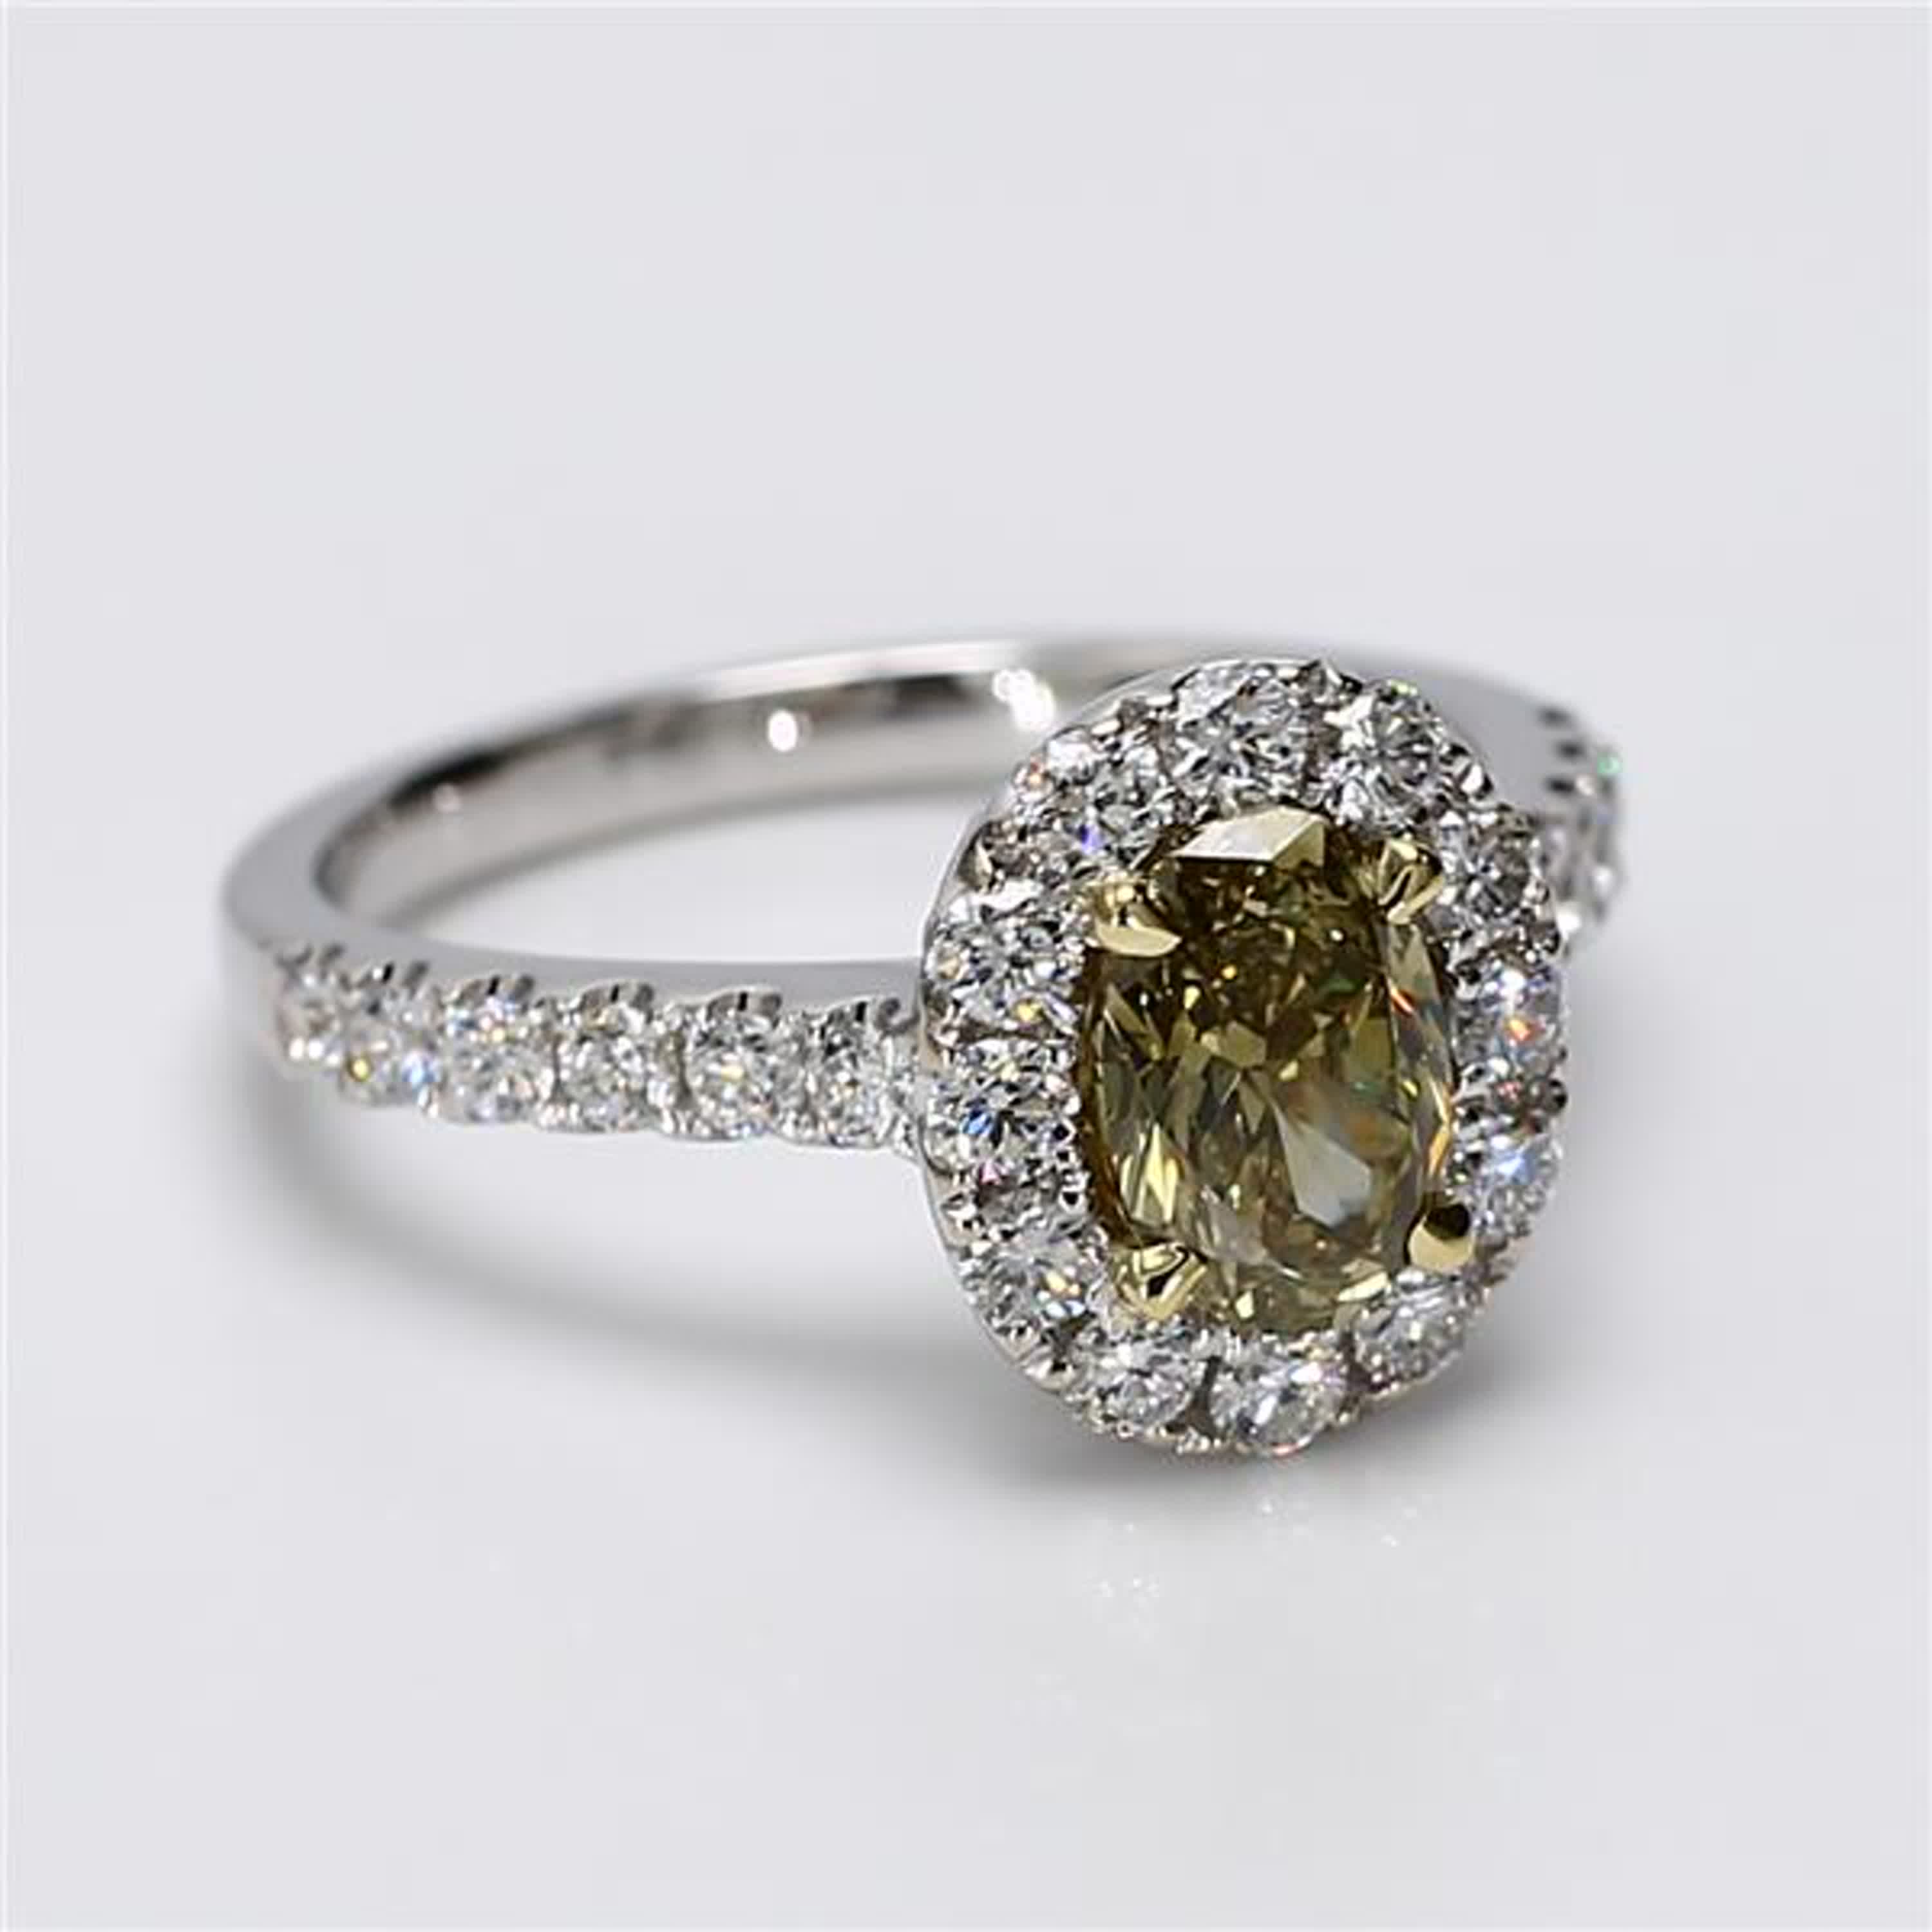 GIA Certified Natural Yellow Oval and White Diamond 1.78 Carat TW Gold Ring